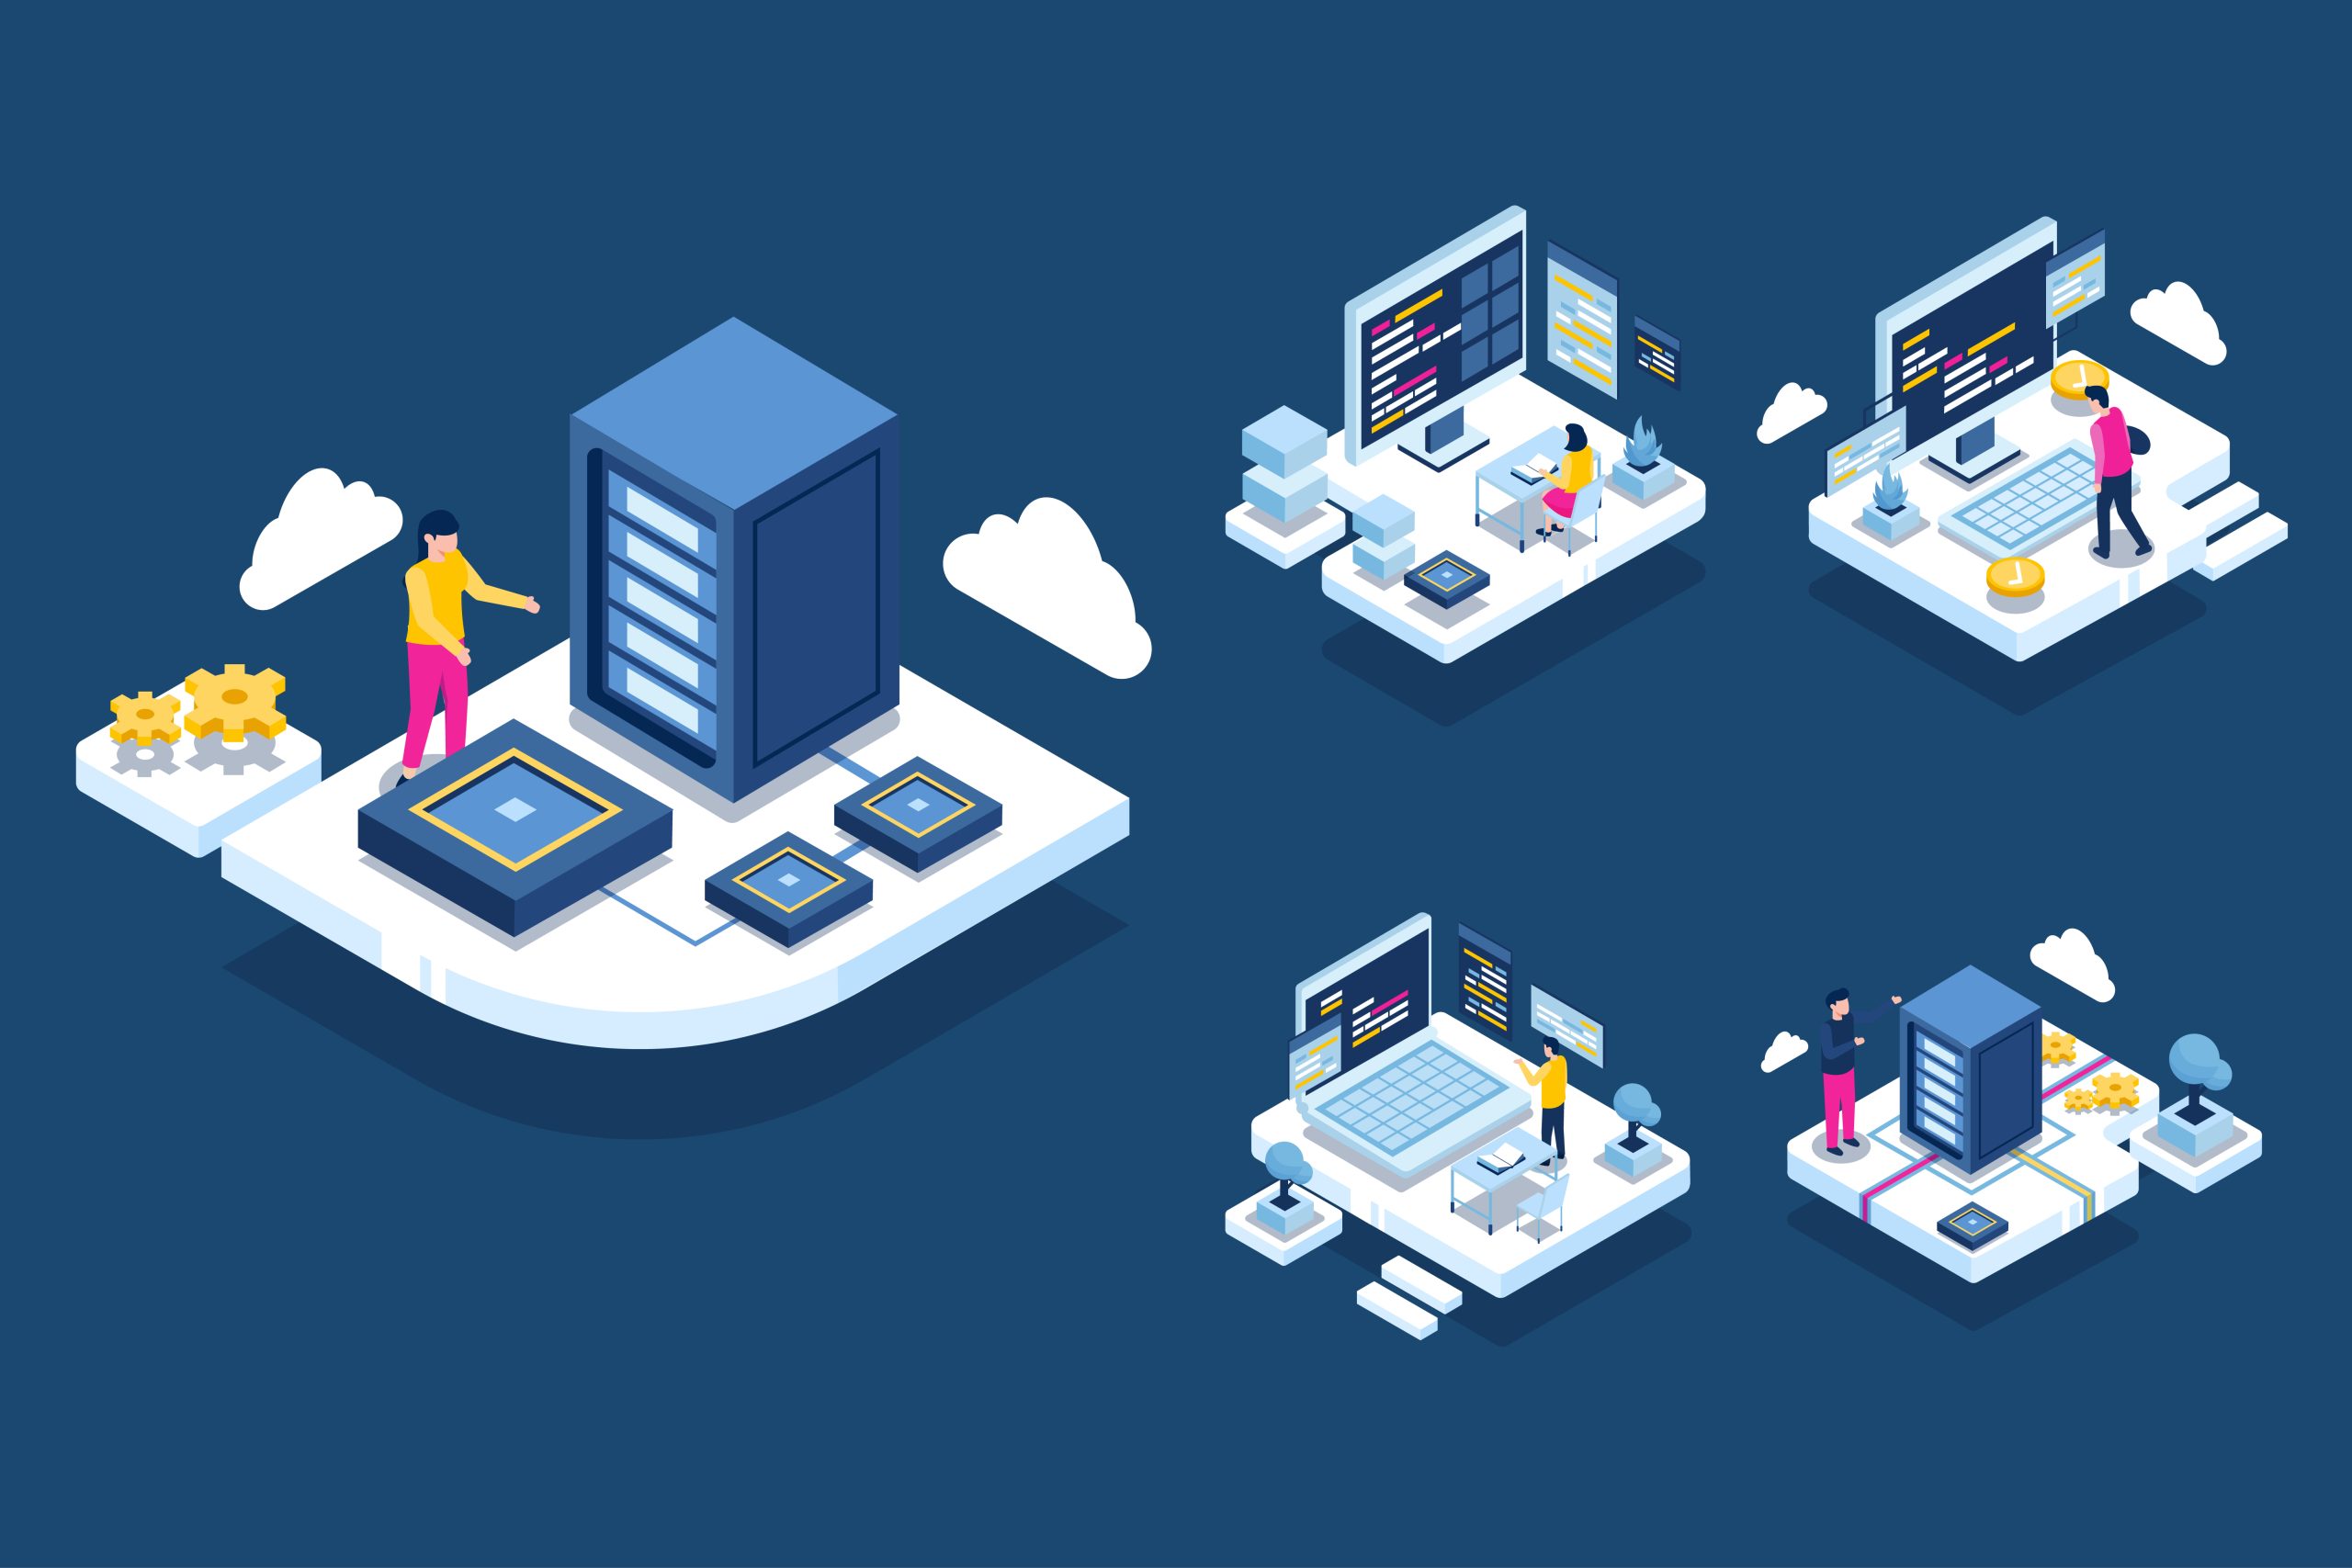 Authorities working in data center room hosting server computer, Provide information services for business, isometric concept vector illustration